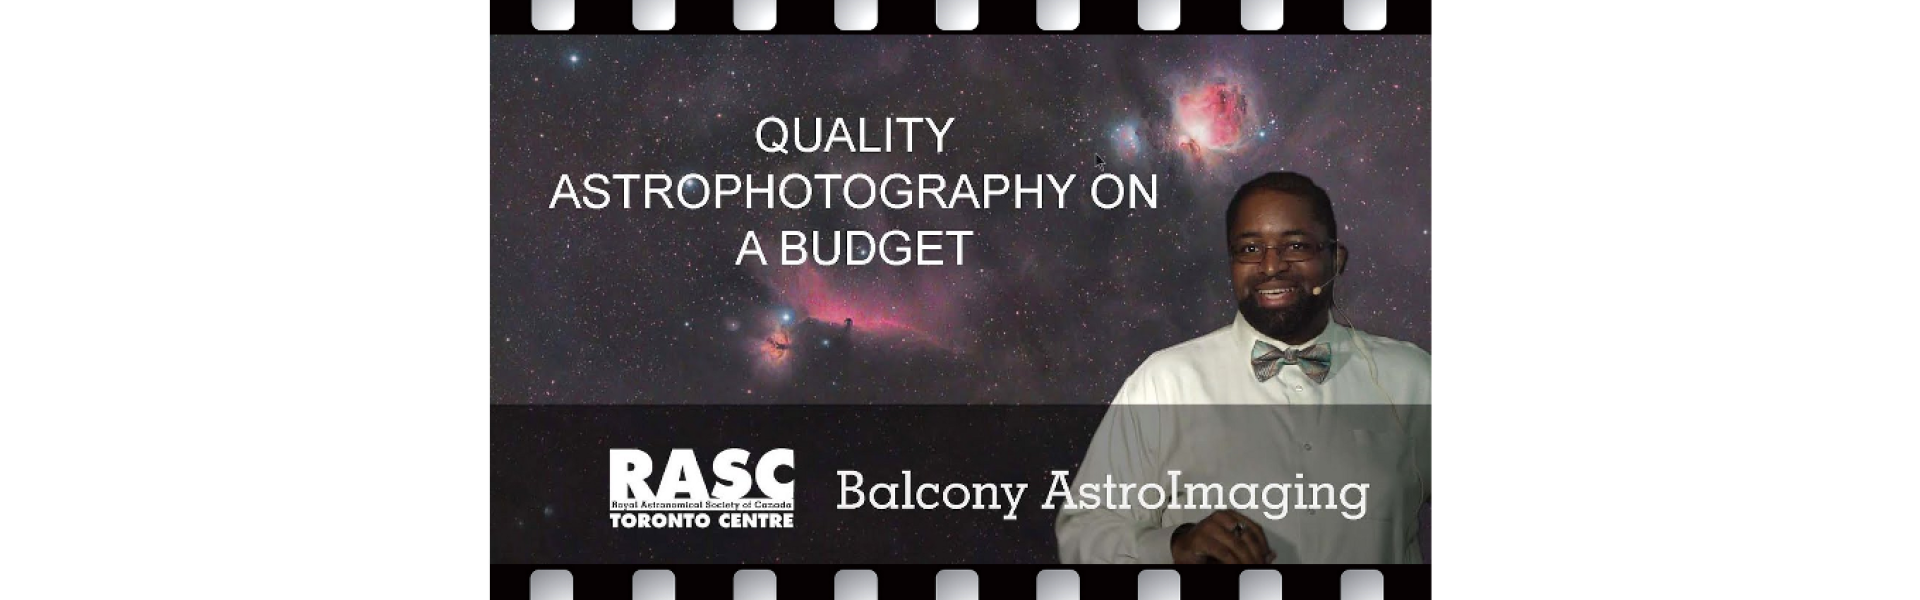 Quality Astrophotography on a Budget